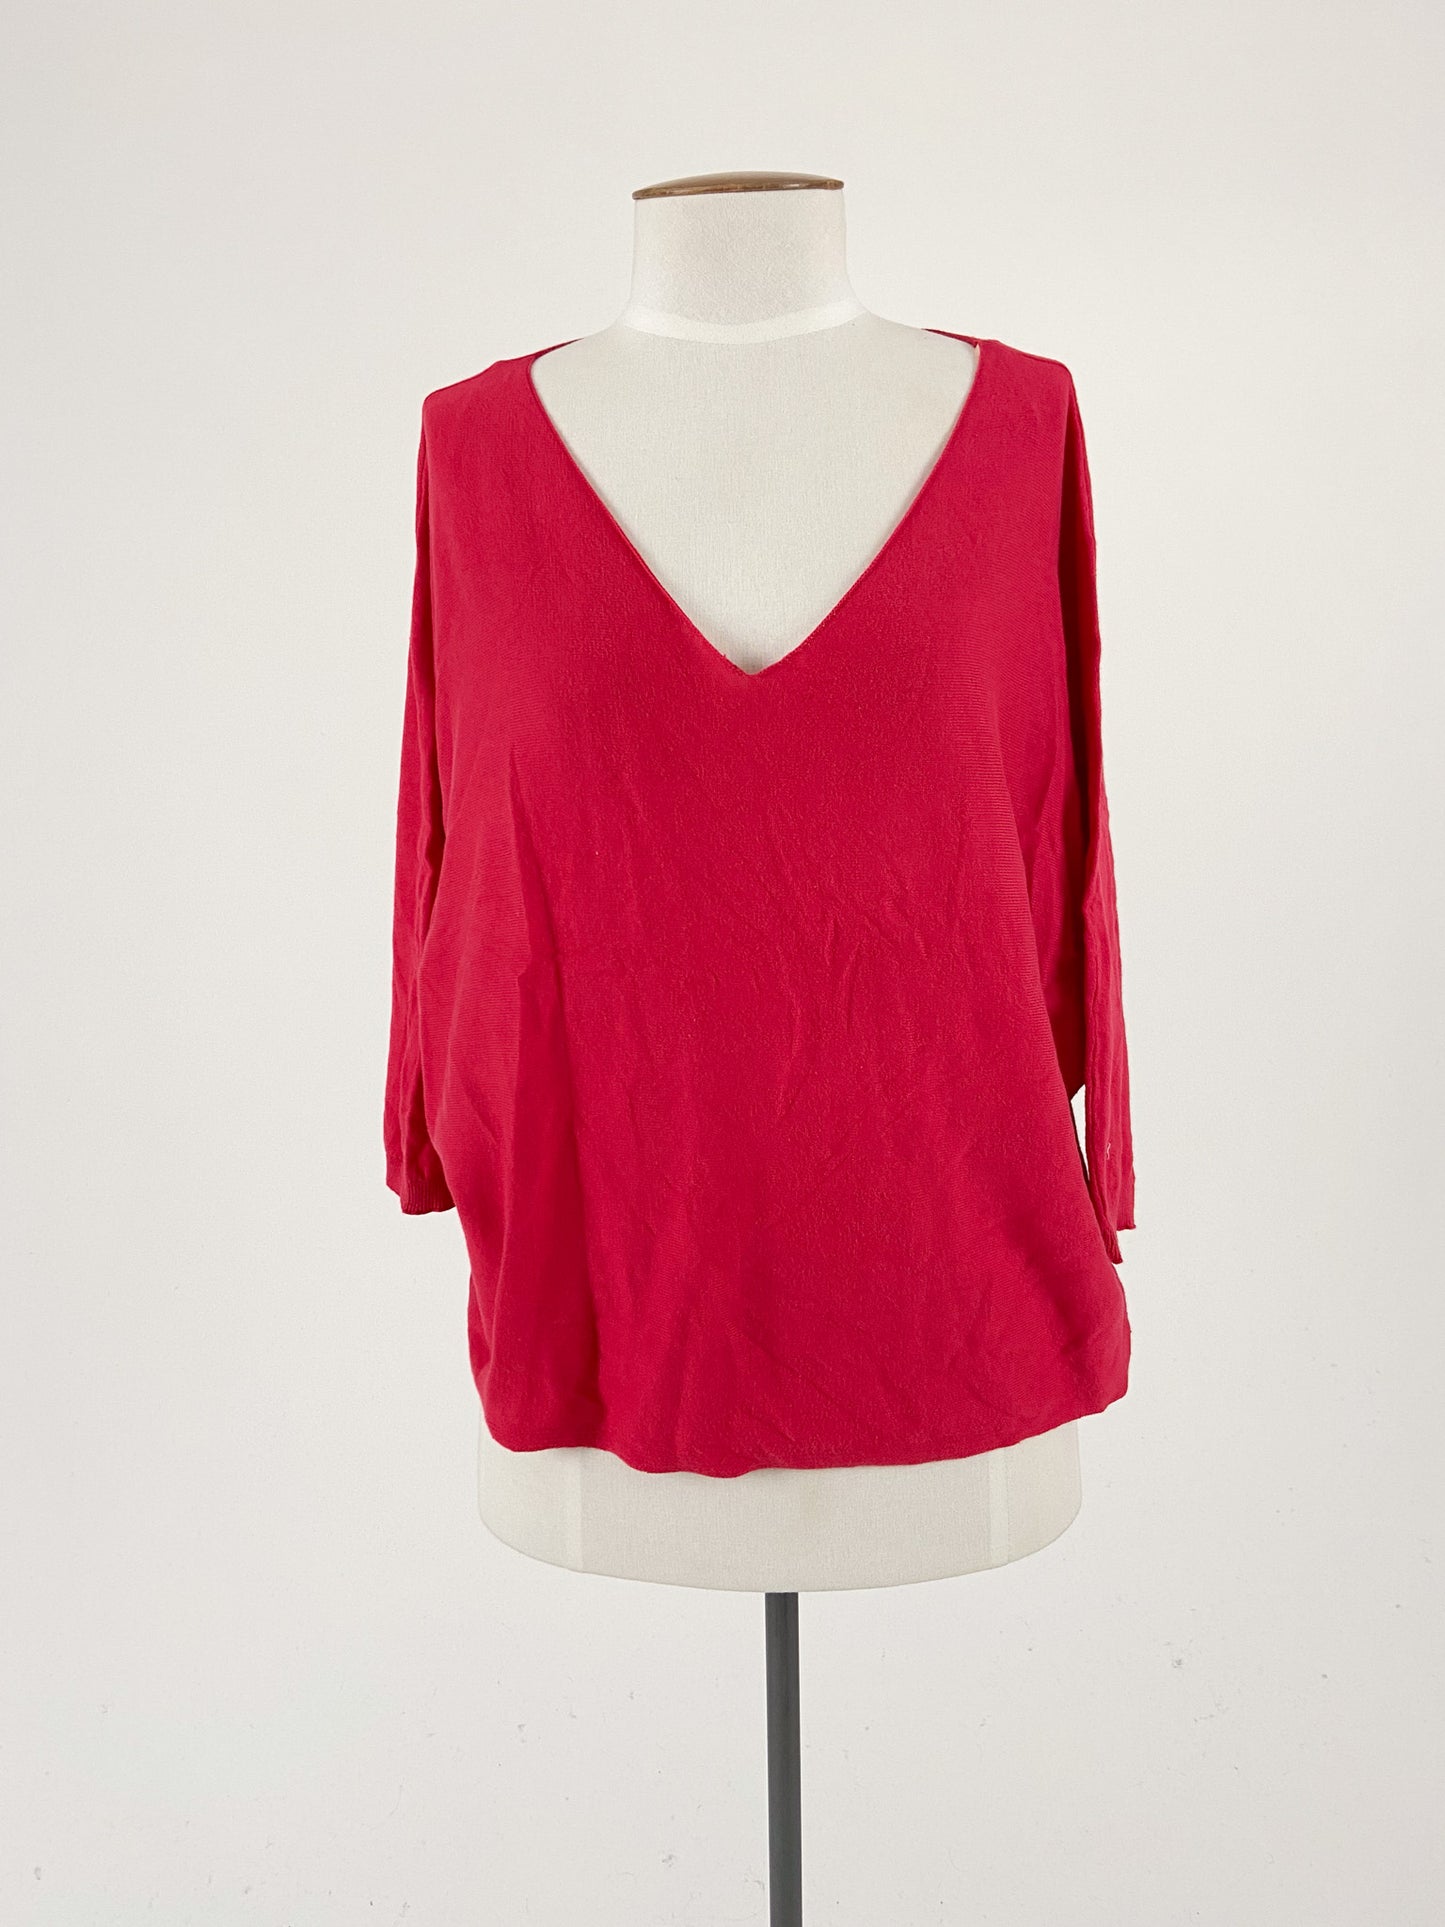 SASS | Red Casual/Workwear Top | Size 8